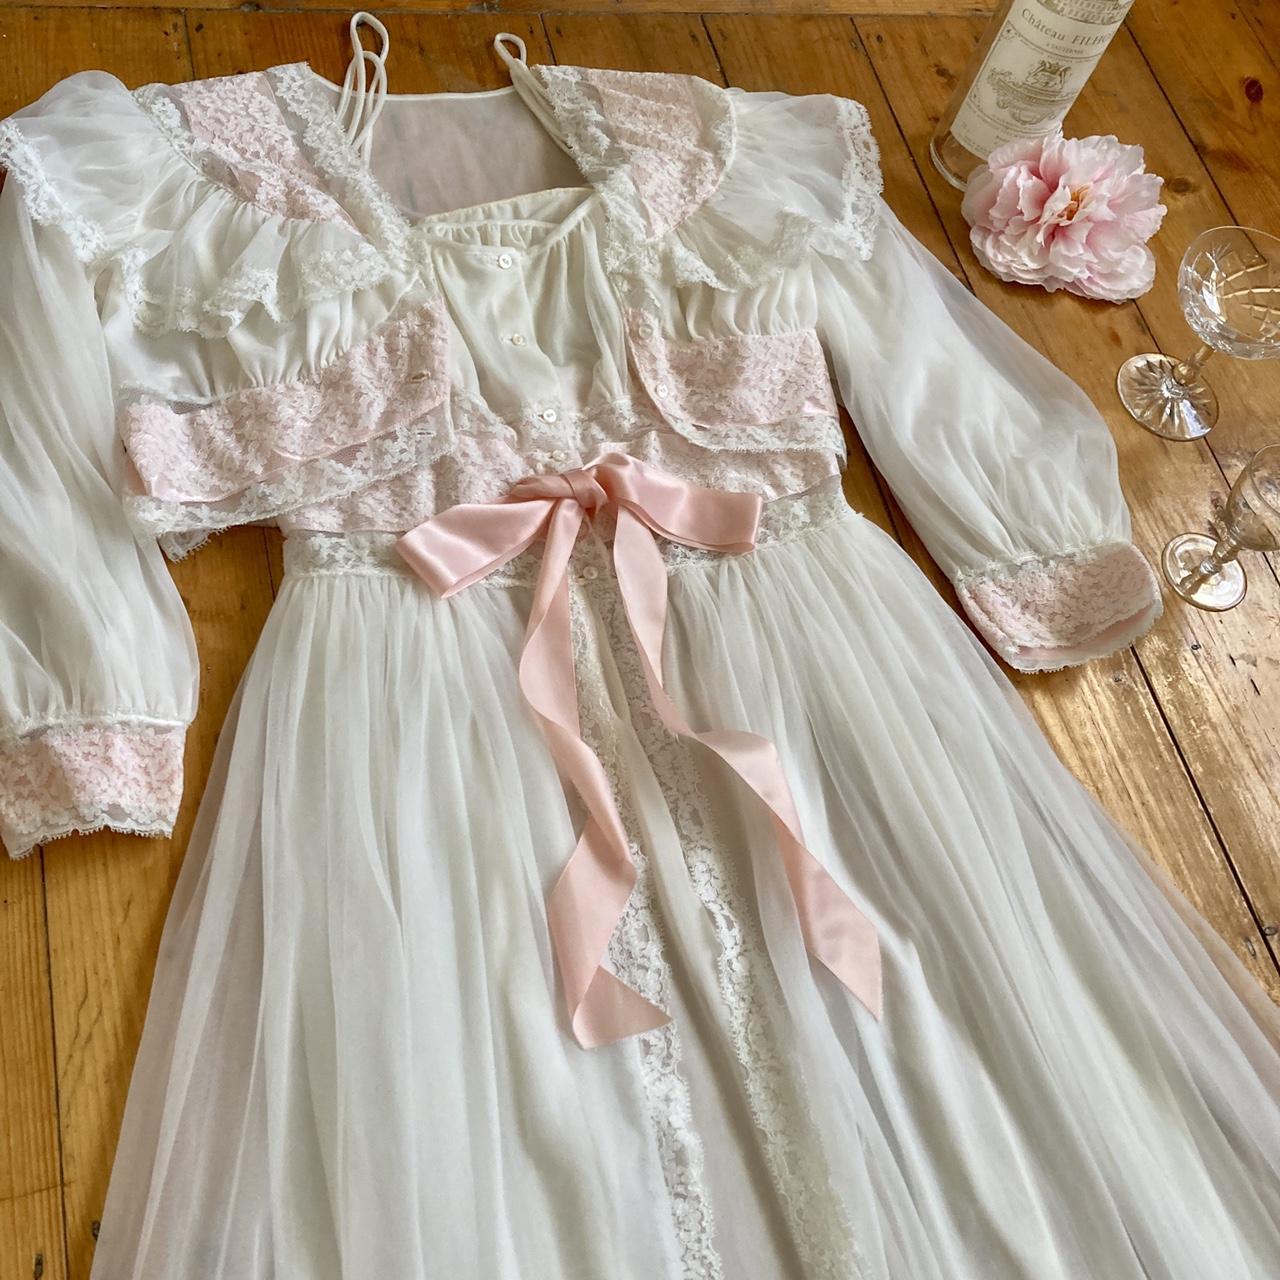 ROMANTIC ANGELIC LACEY NIGHTDRESS & BED JACKET... - Depop